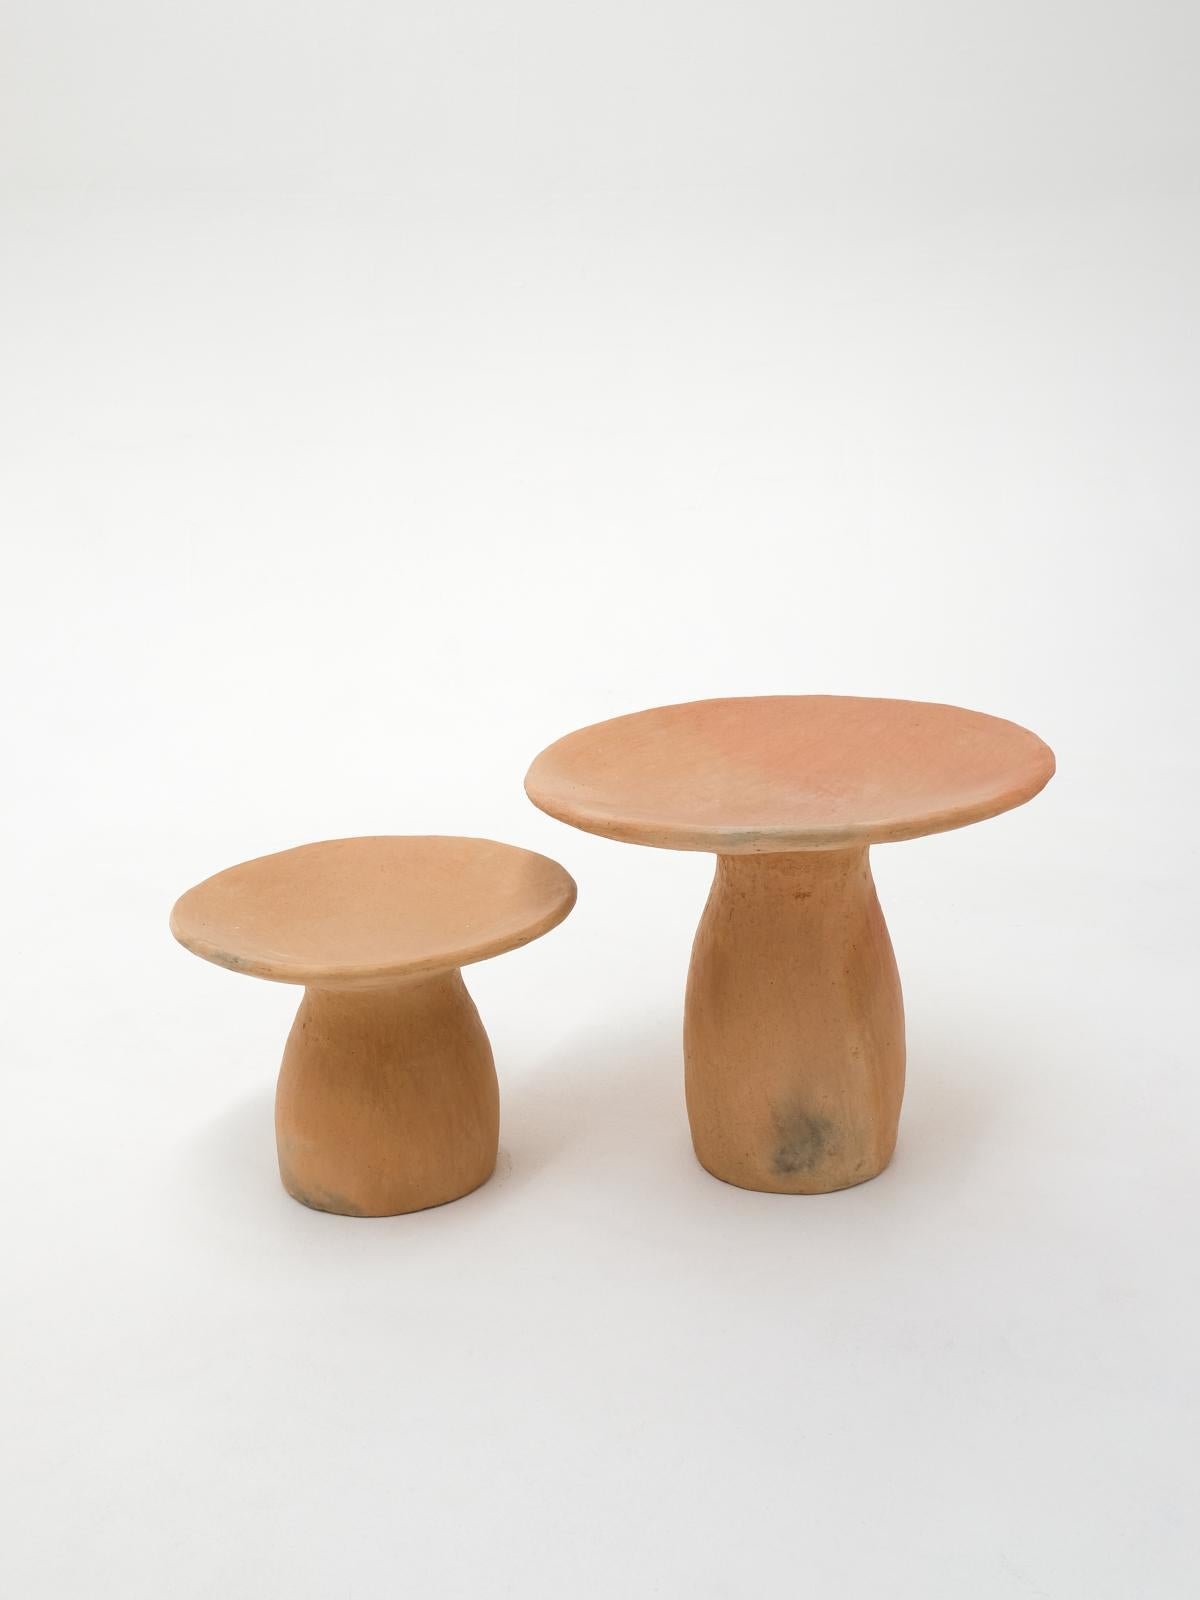 Terracotta contemporary Side Table Made of Clay, Handcrafted by the Potter Houda For Sale 5